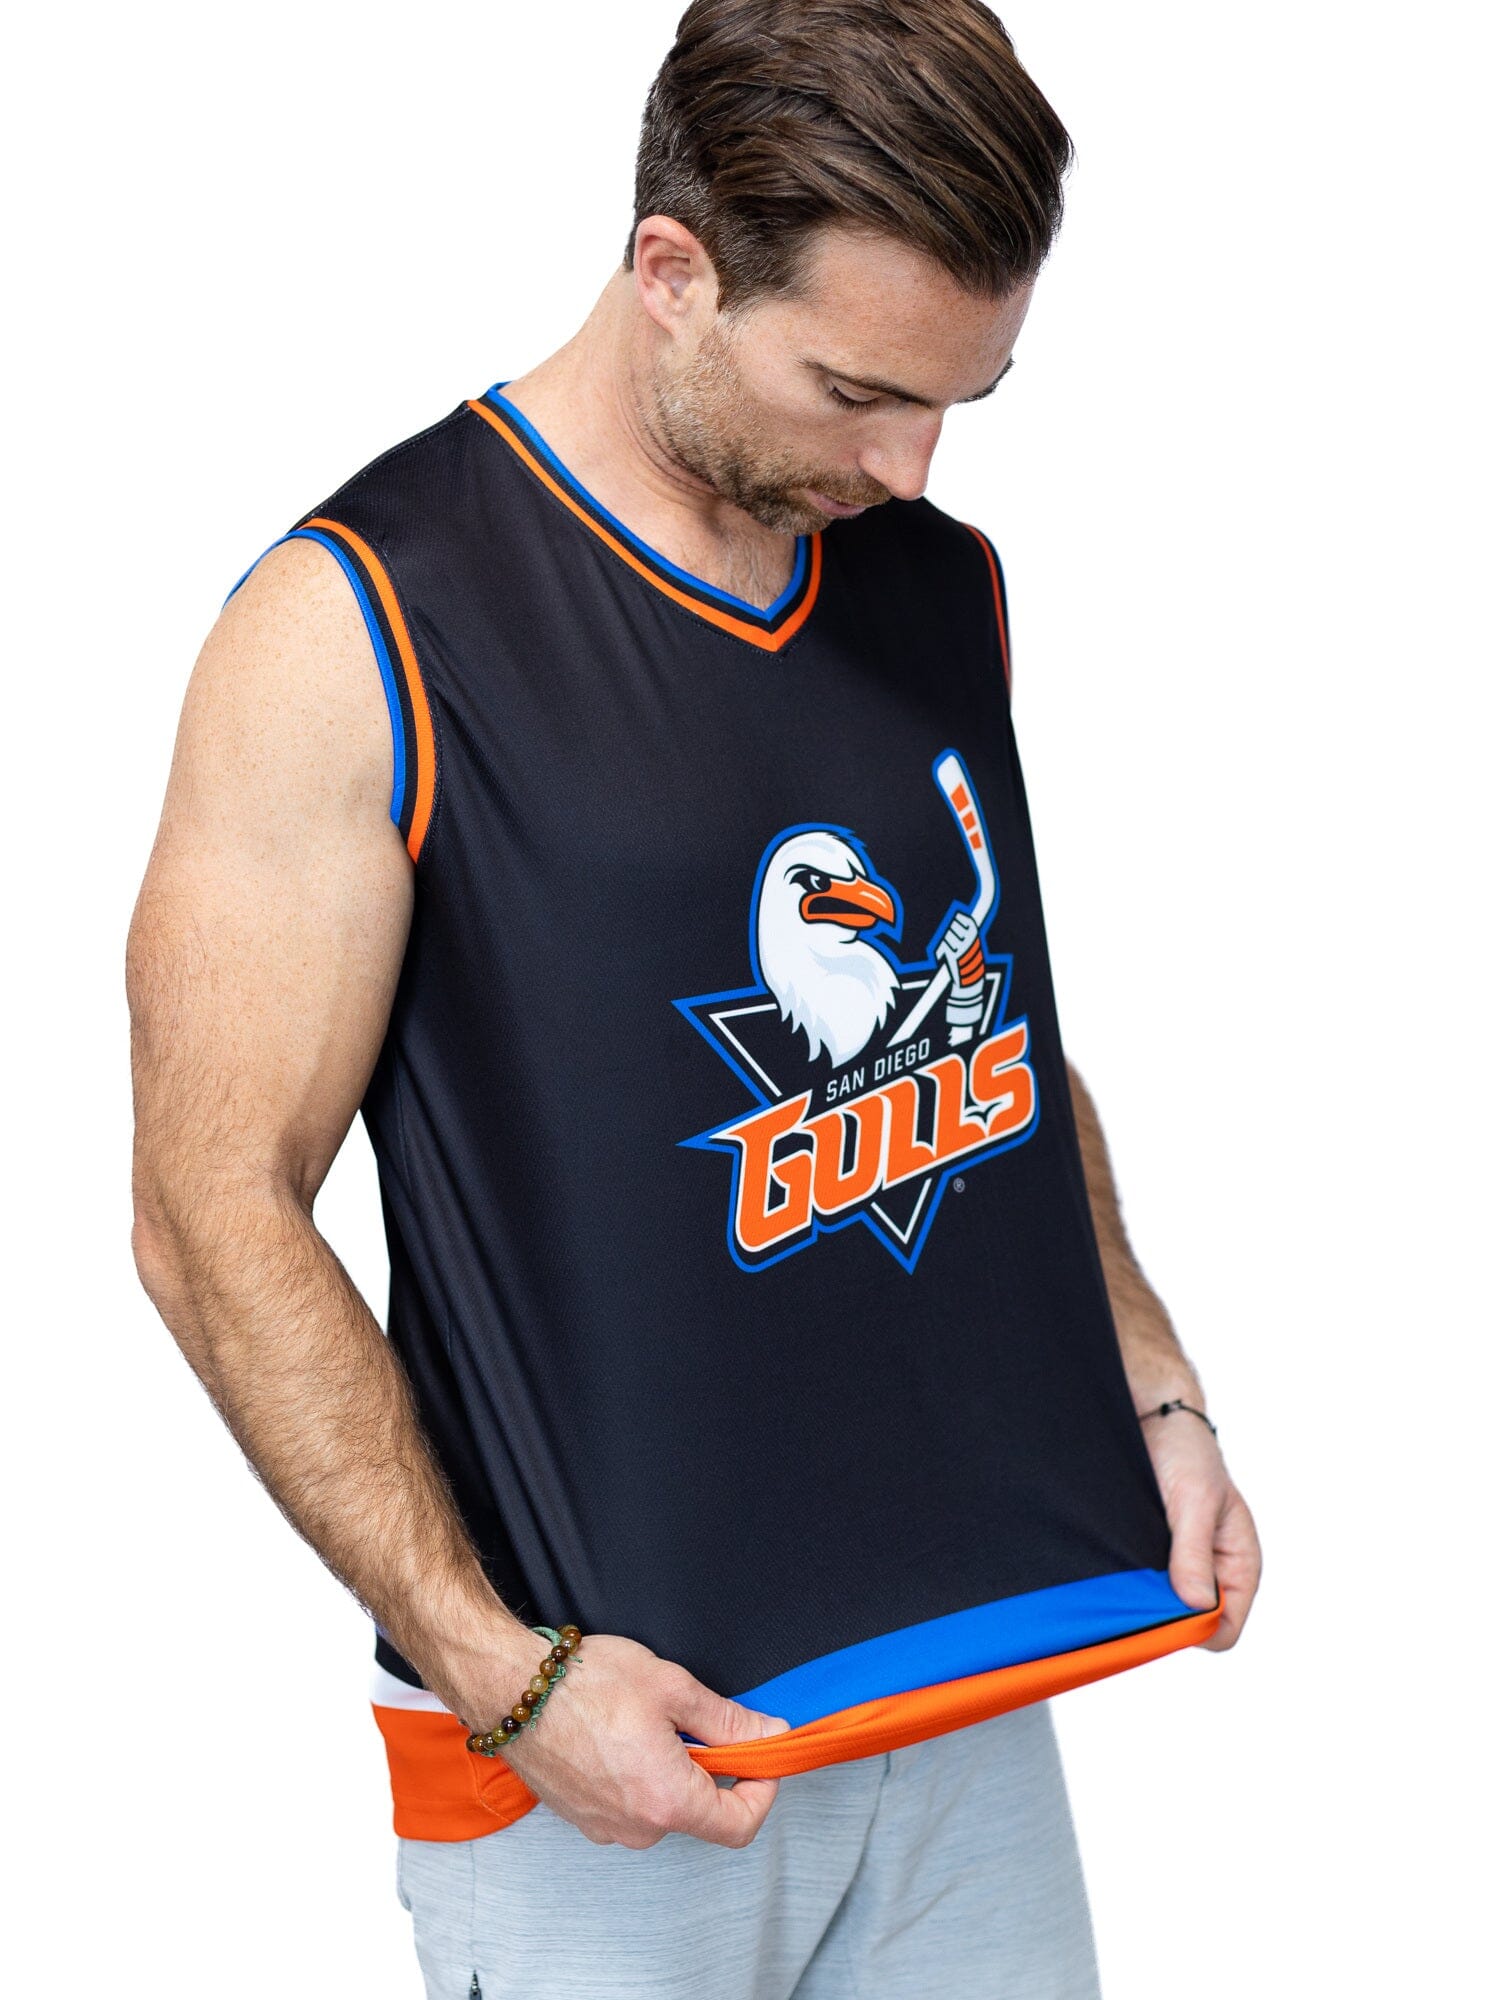 New Blank San Diego Gulls Breast Cancer New Men's CCM Game Jersey